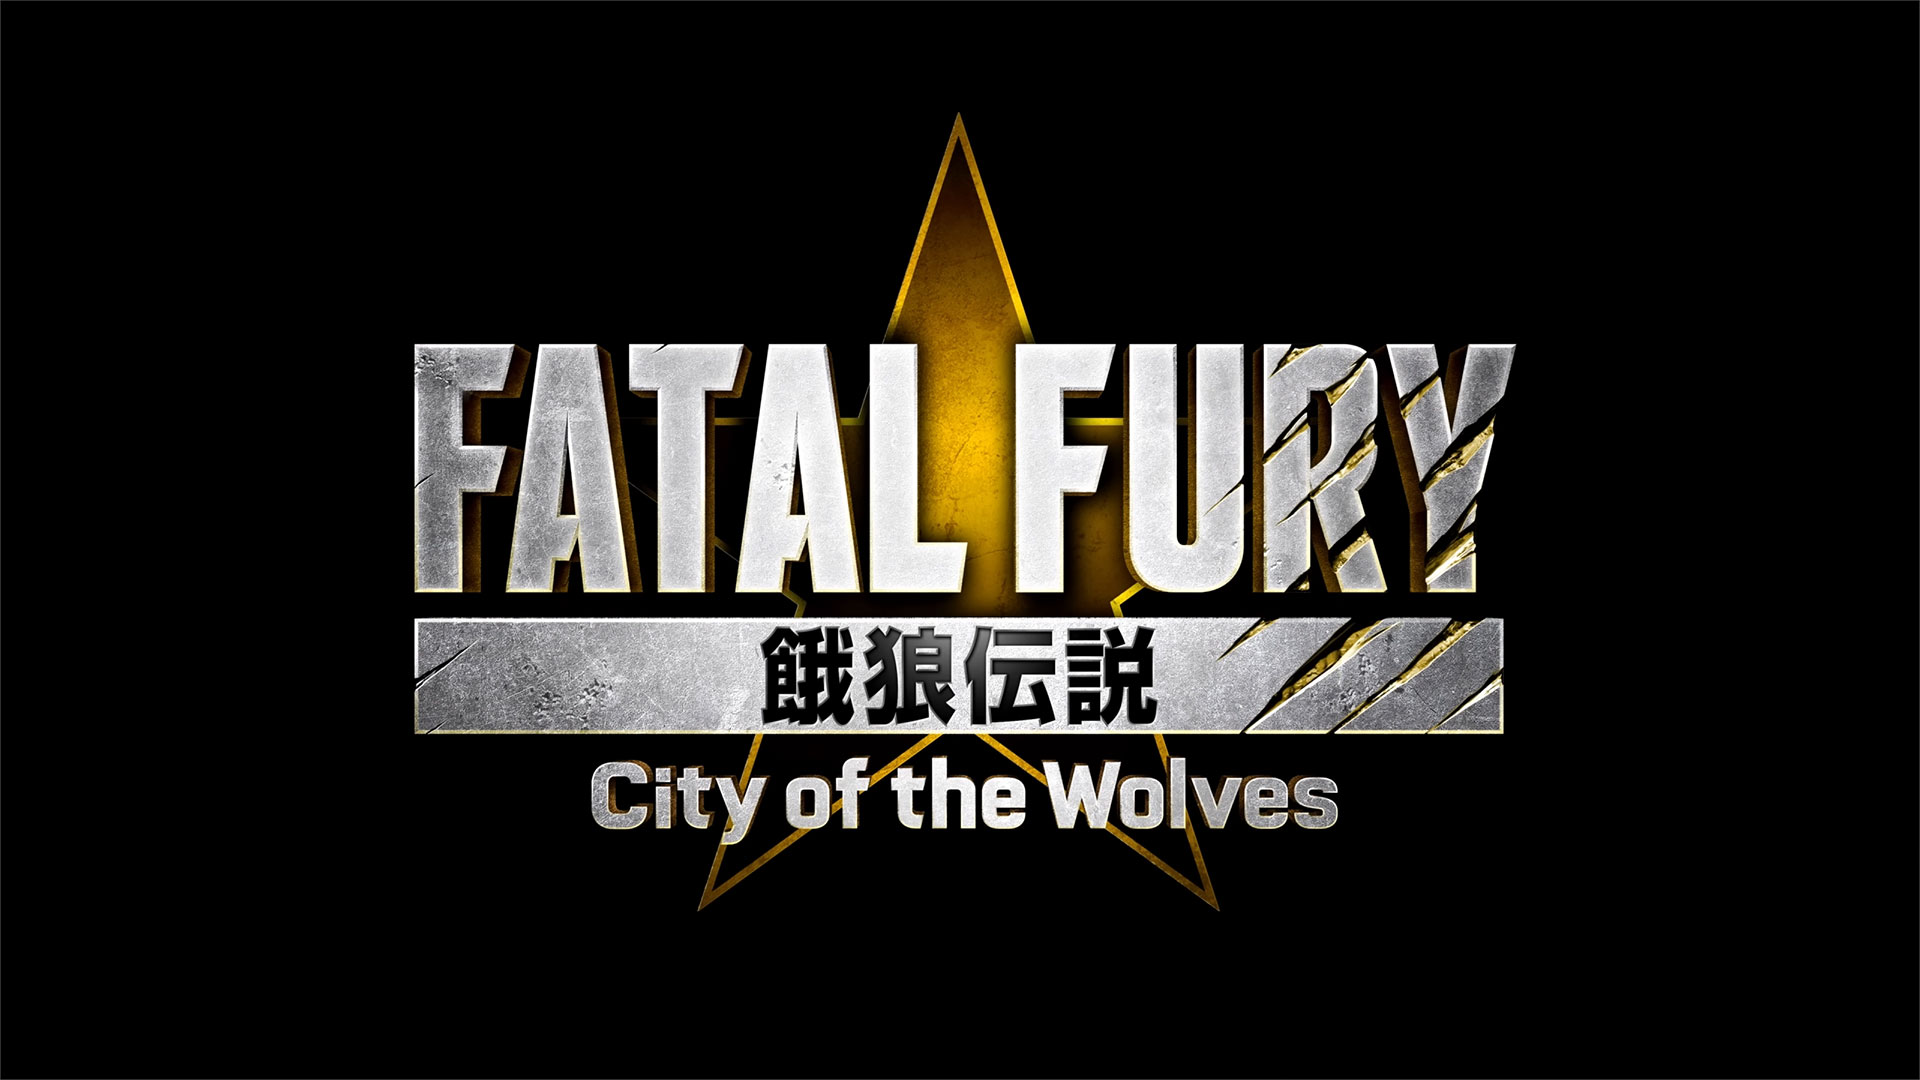 Fatal Fury: City of the Wolves has been announced as a new fighting game from SNK